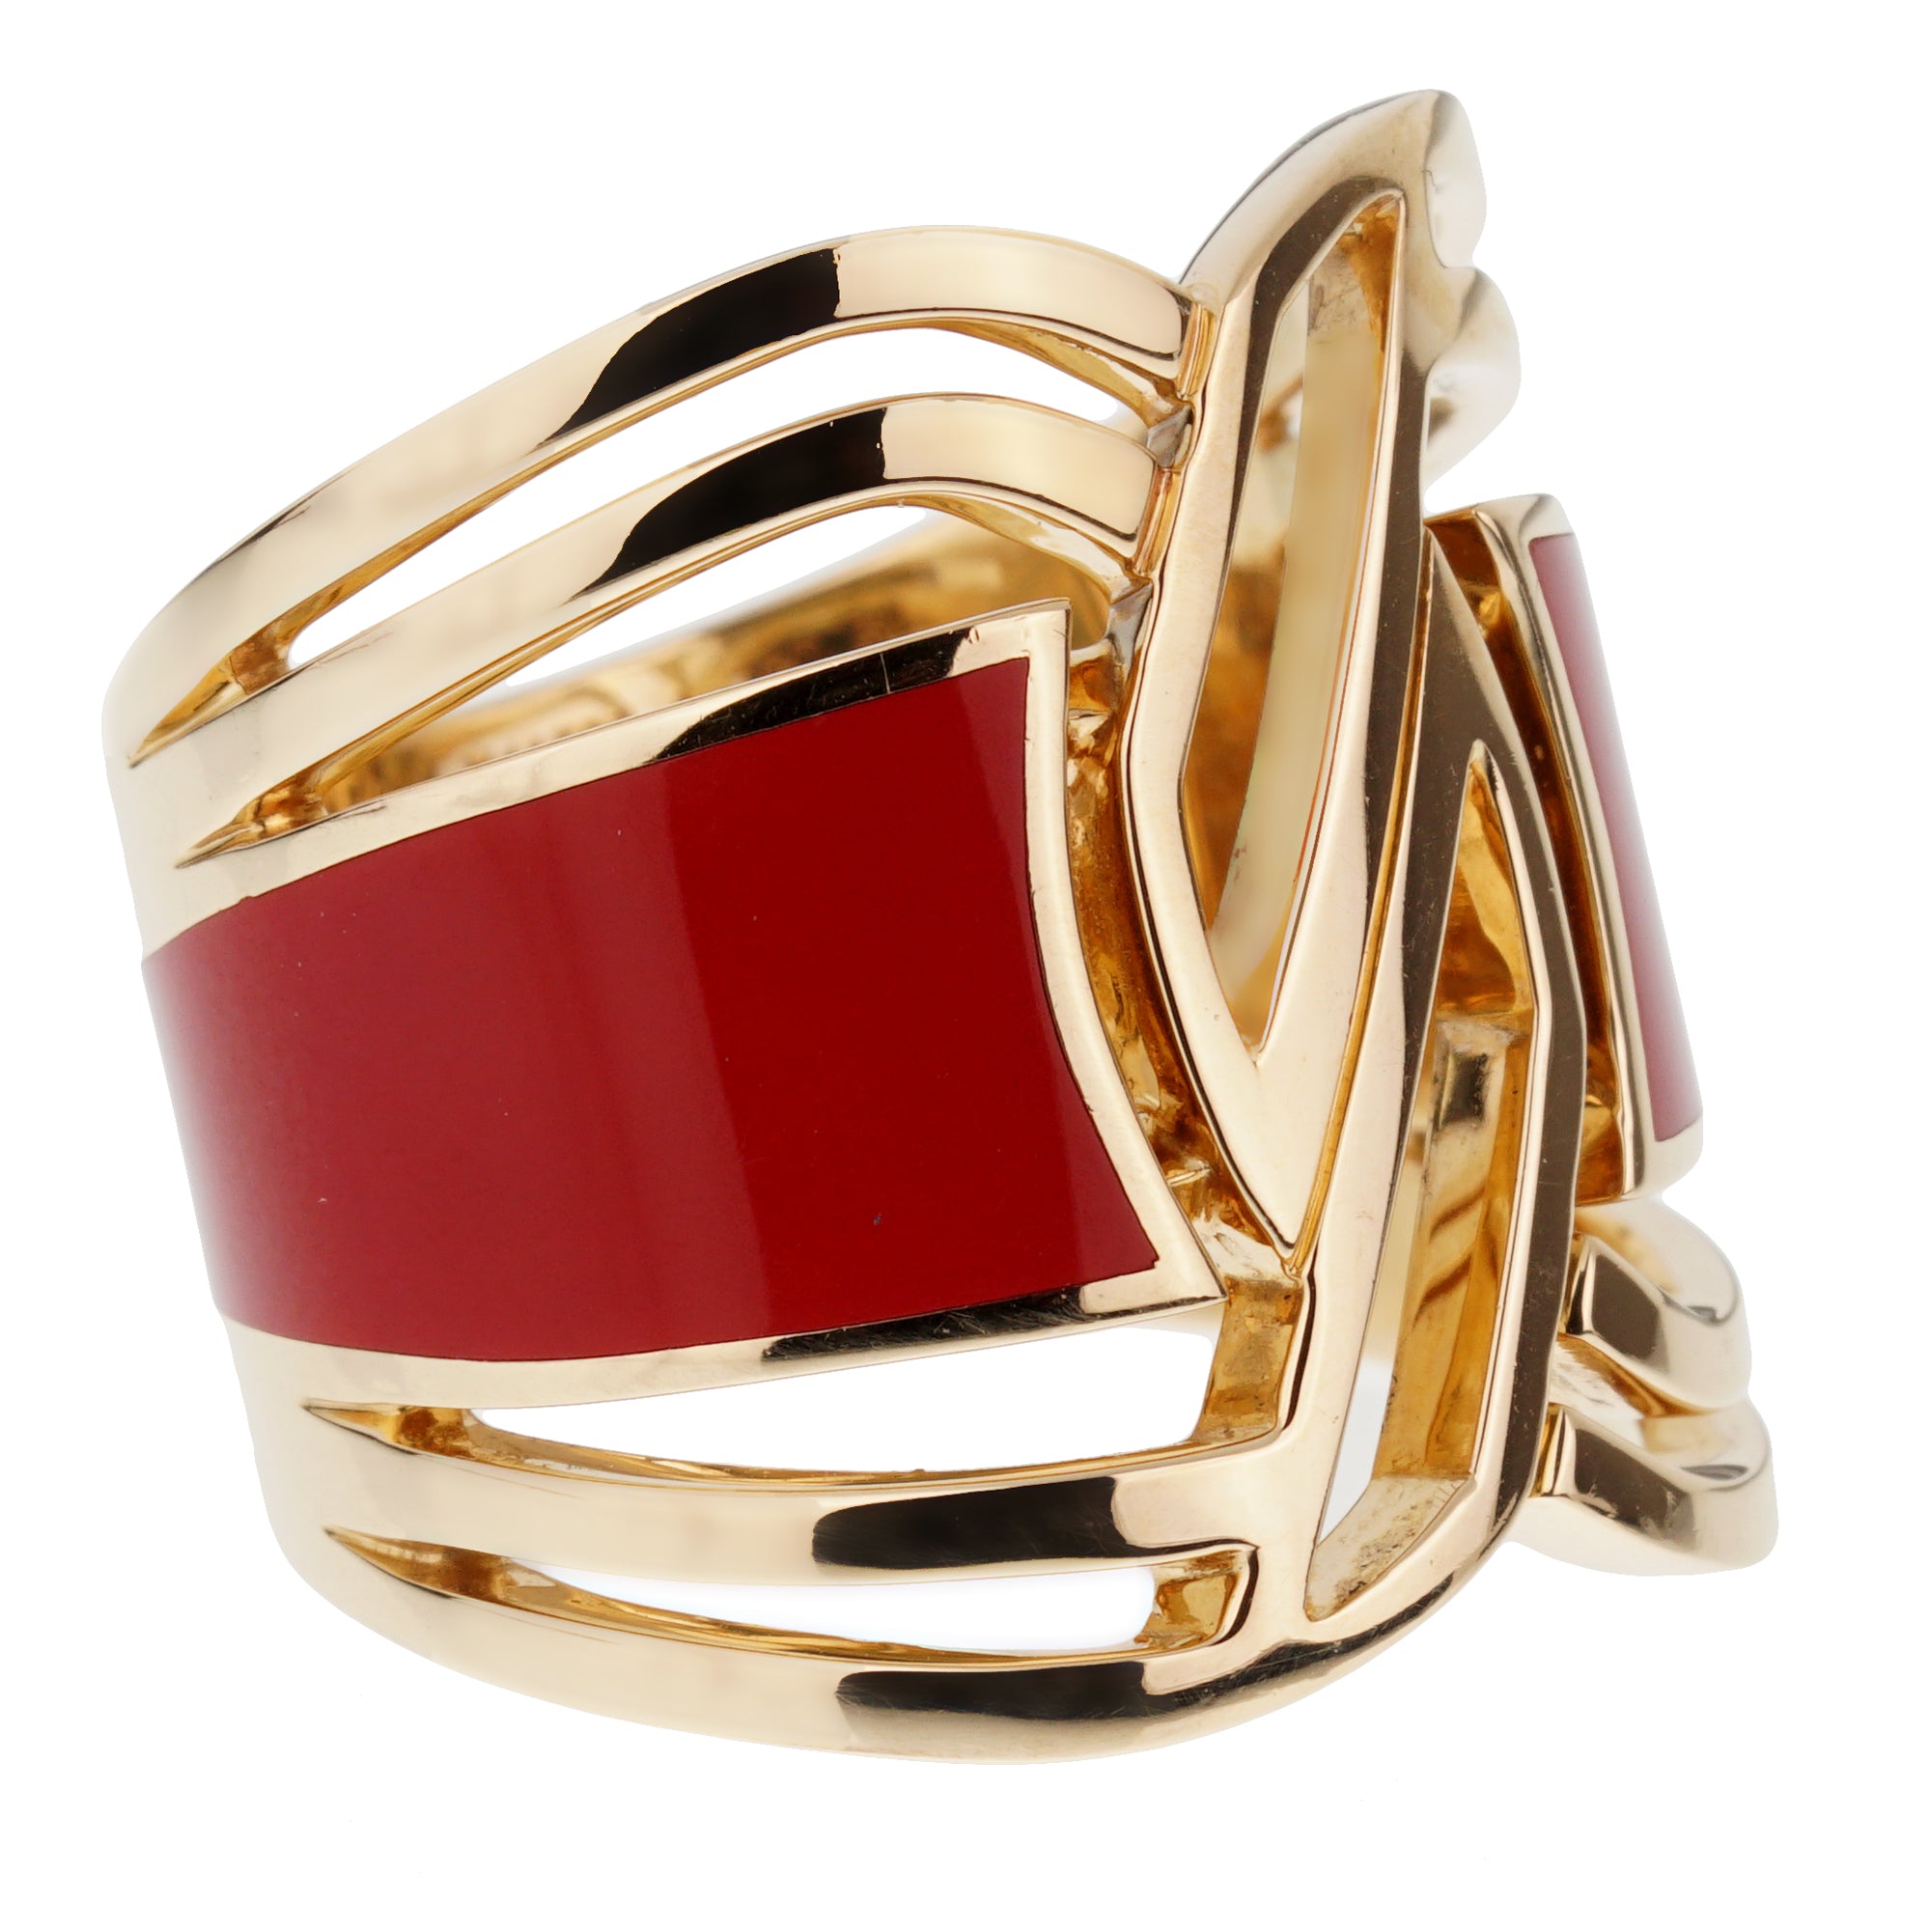 Chanel Strass & Enamel CC Cocktail Ring - Gold-Plated Cocktail Ring, Rings  - CHA970534